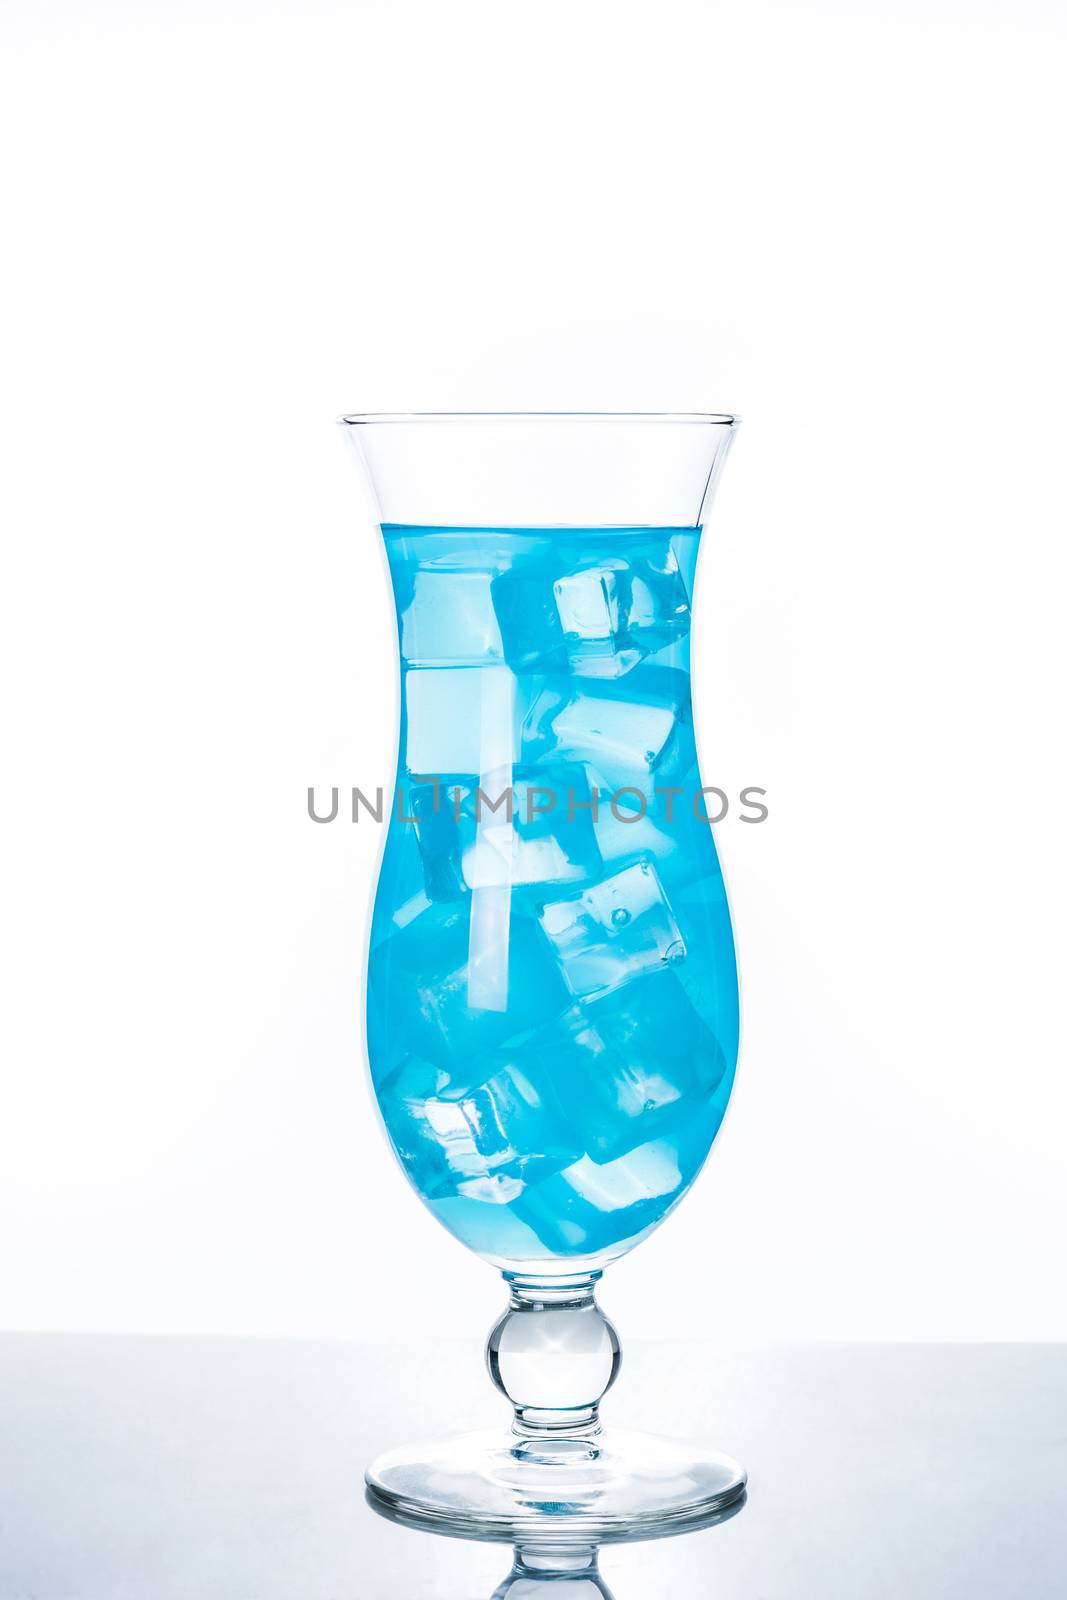 Blue Hawaiian cocktail on white background by chandlervid85